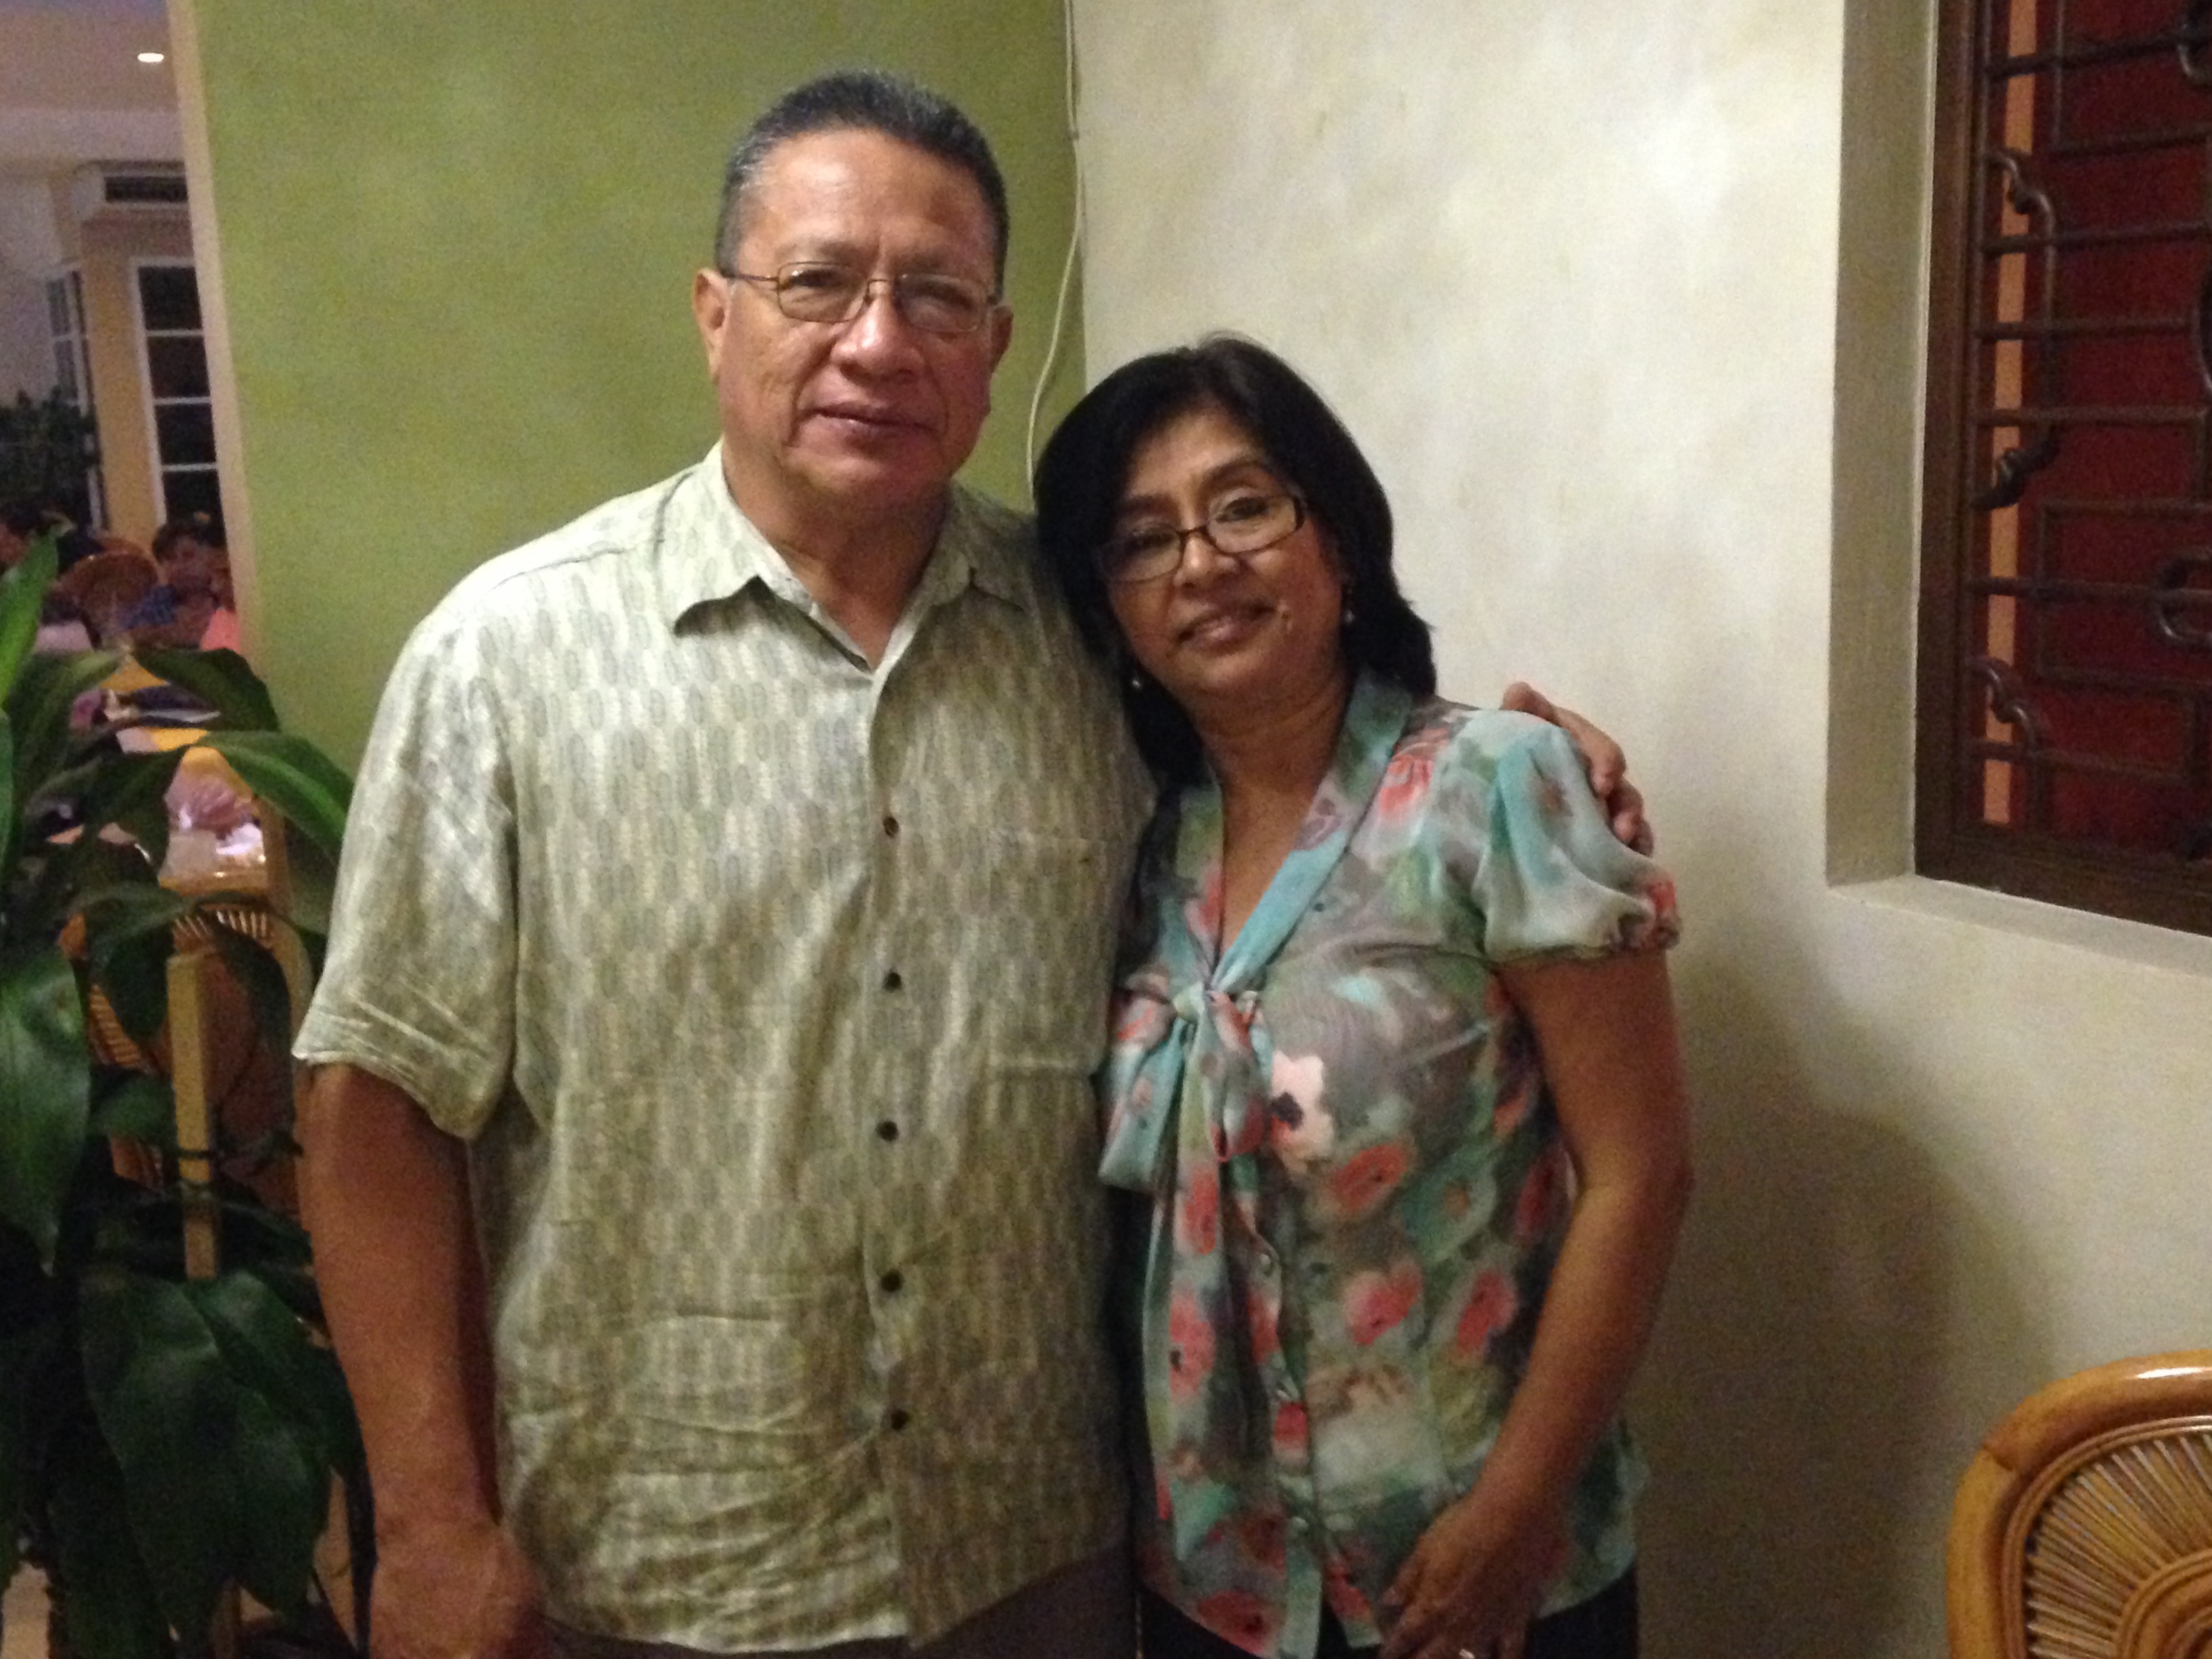 Pastor Jorge & Sister Rosario, Representing Pastor Couples who will attend the Retreat